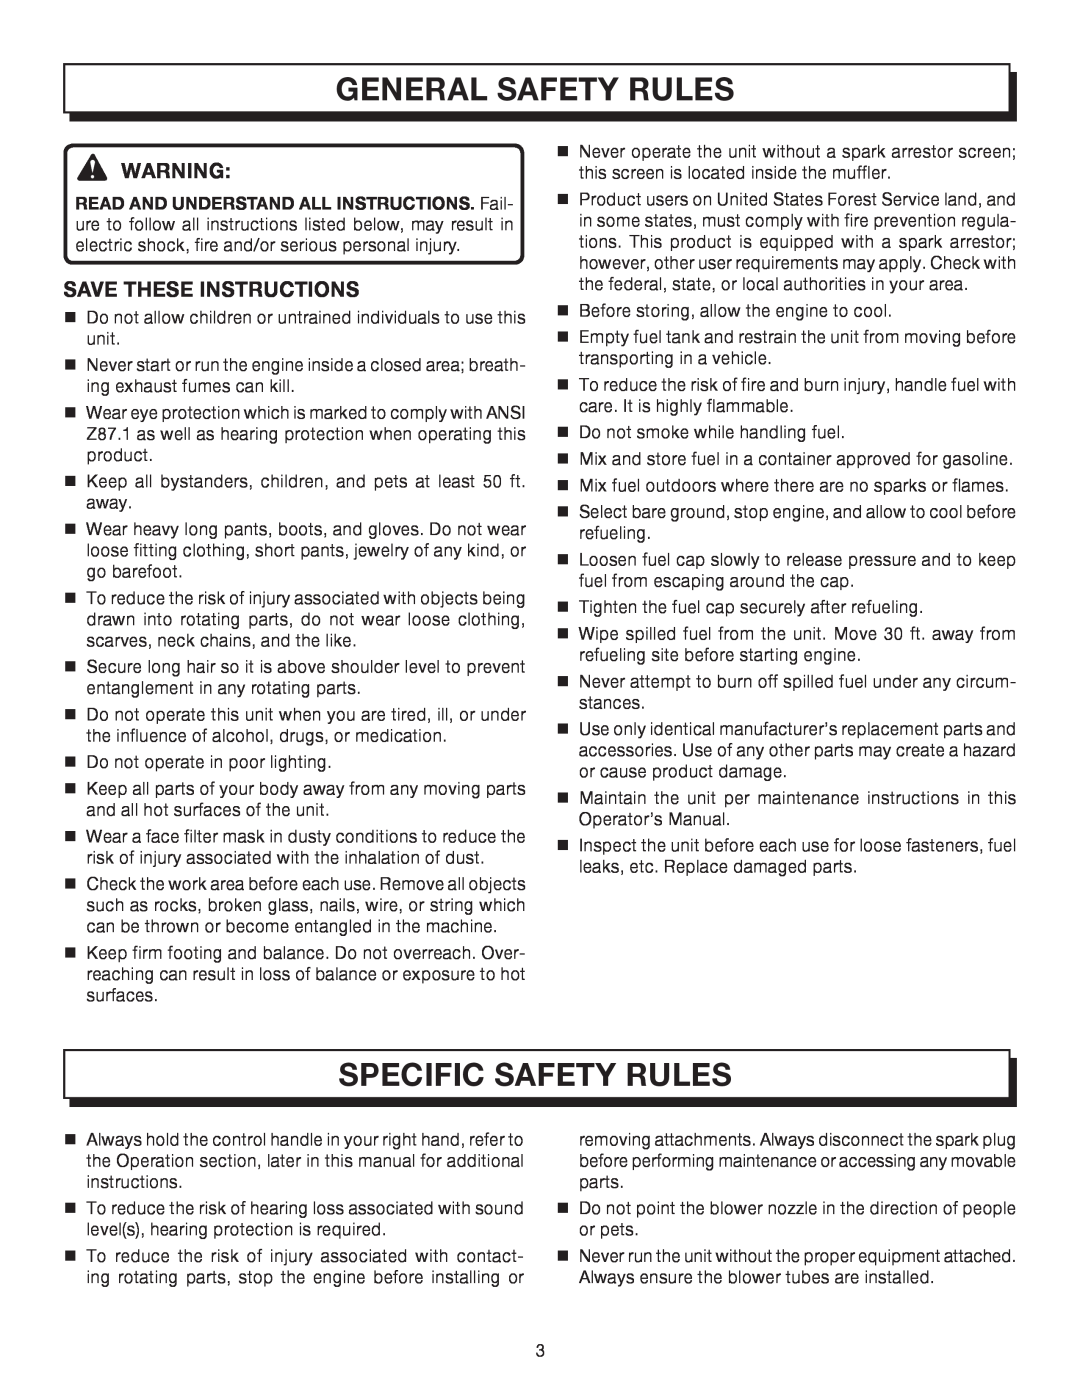 Homelite UT08512A manual General Safety Rules, Specific Safety Rules, Save These Instructions 